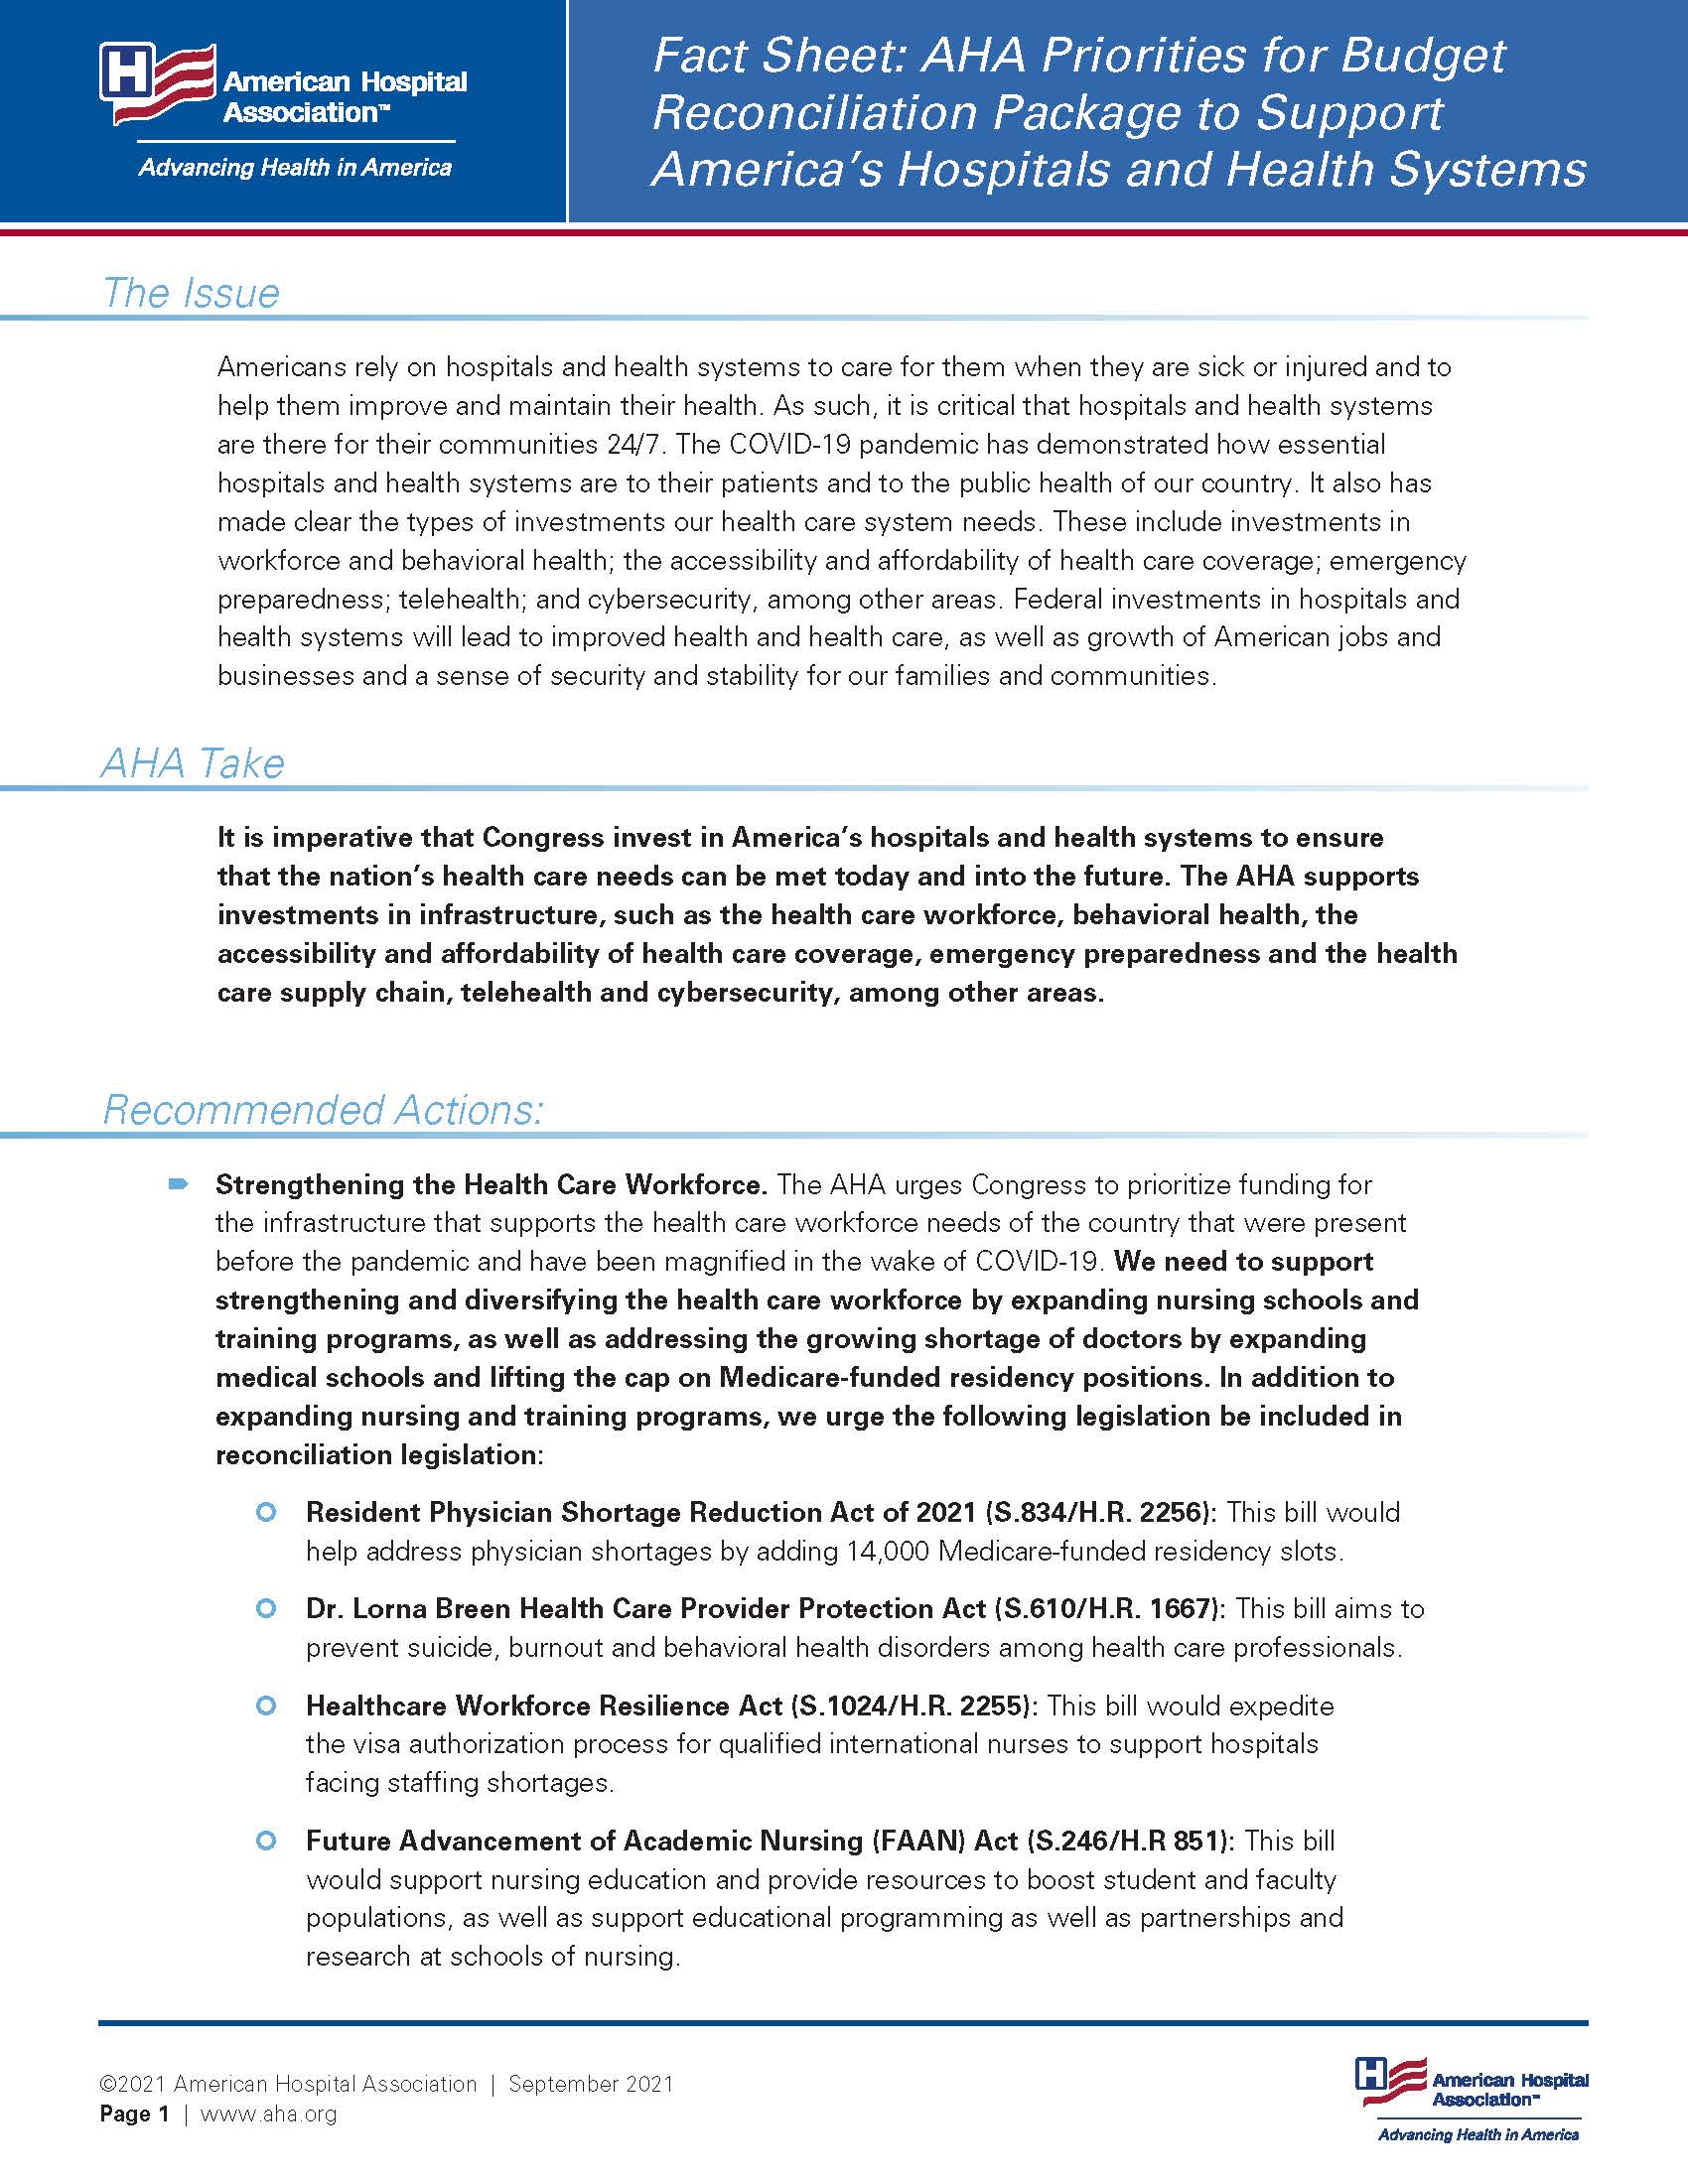 Fact Sheet: AHA Priorities for Budget Reconciliation Package to Support America’s Hospitals and Health Systems page 1.